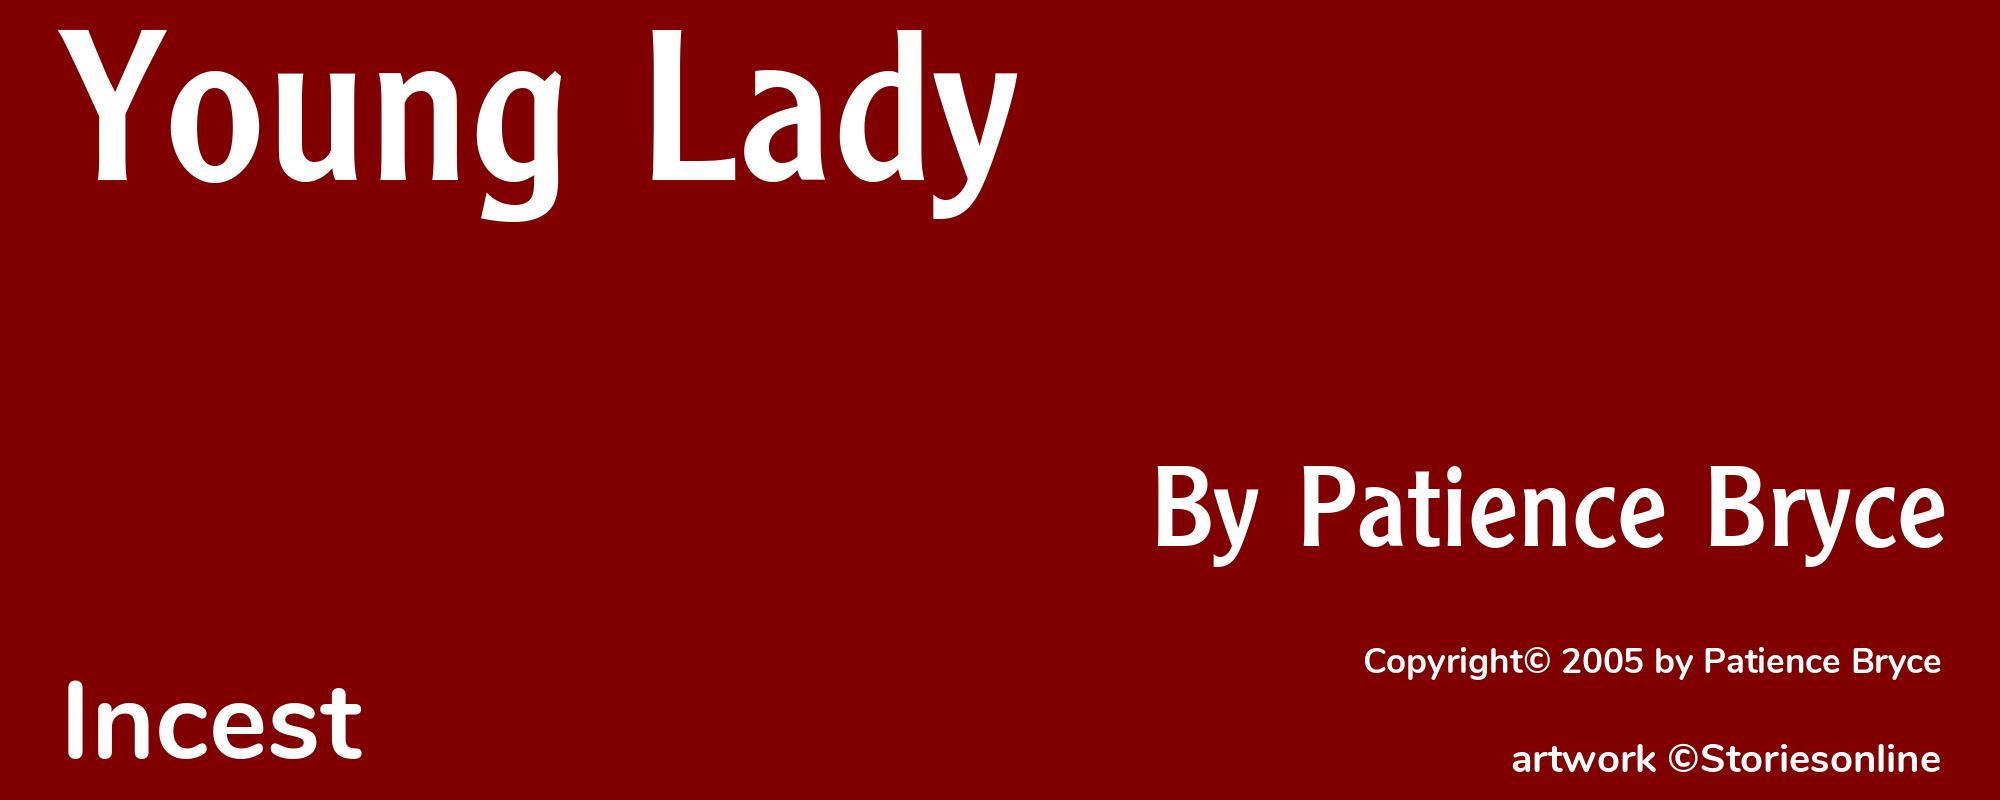 Young Lady - Cover